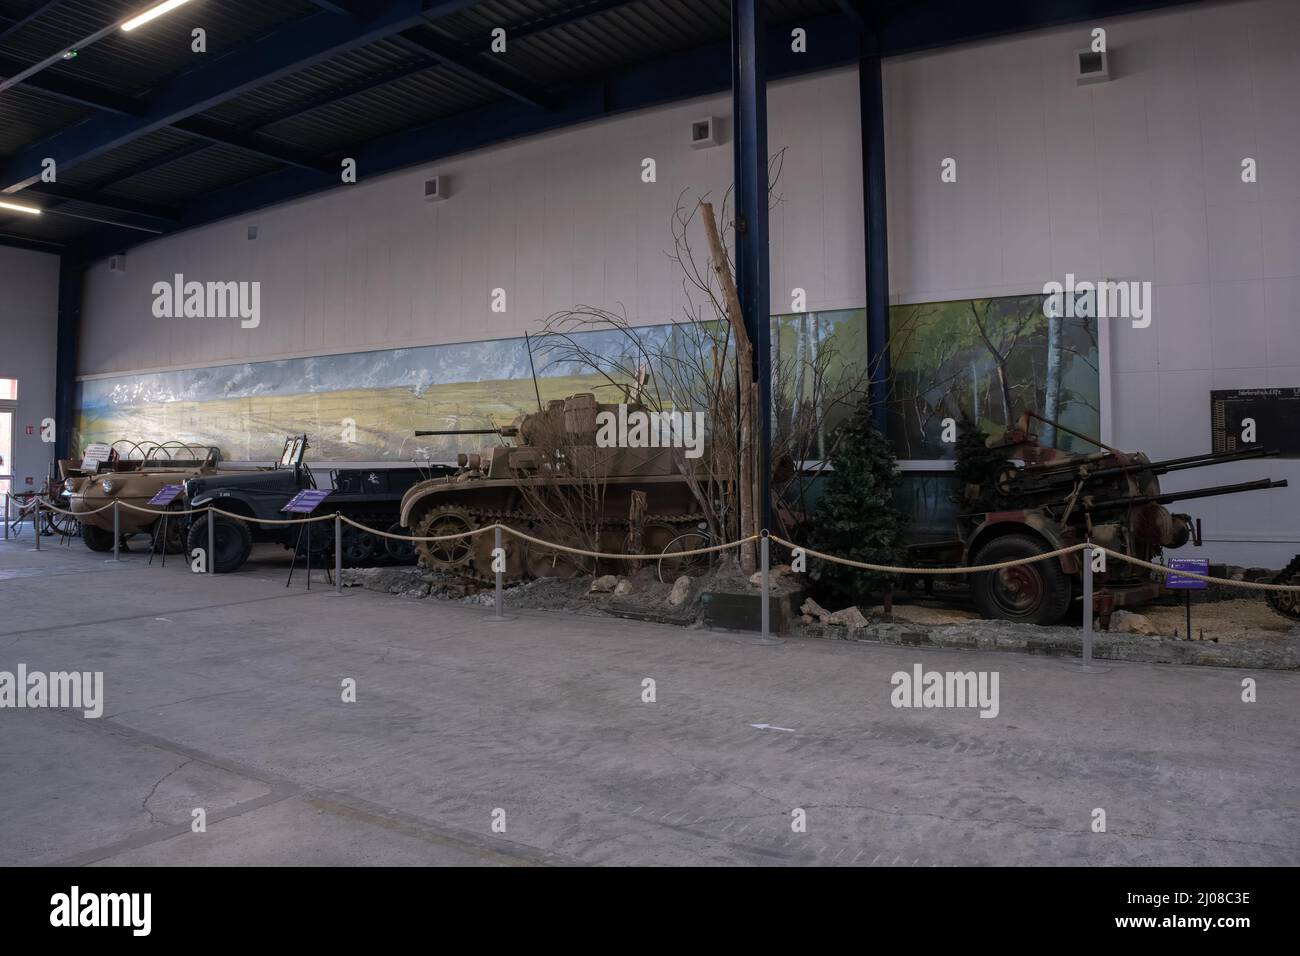 Saumur, France - February 26, 2022:  German armoured vehicles and weapons at the tank museum in Saumur (Musee des Blindes). Second world war exhibitio Stock Photo